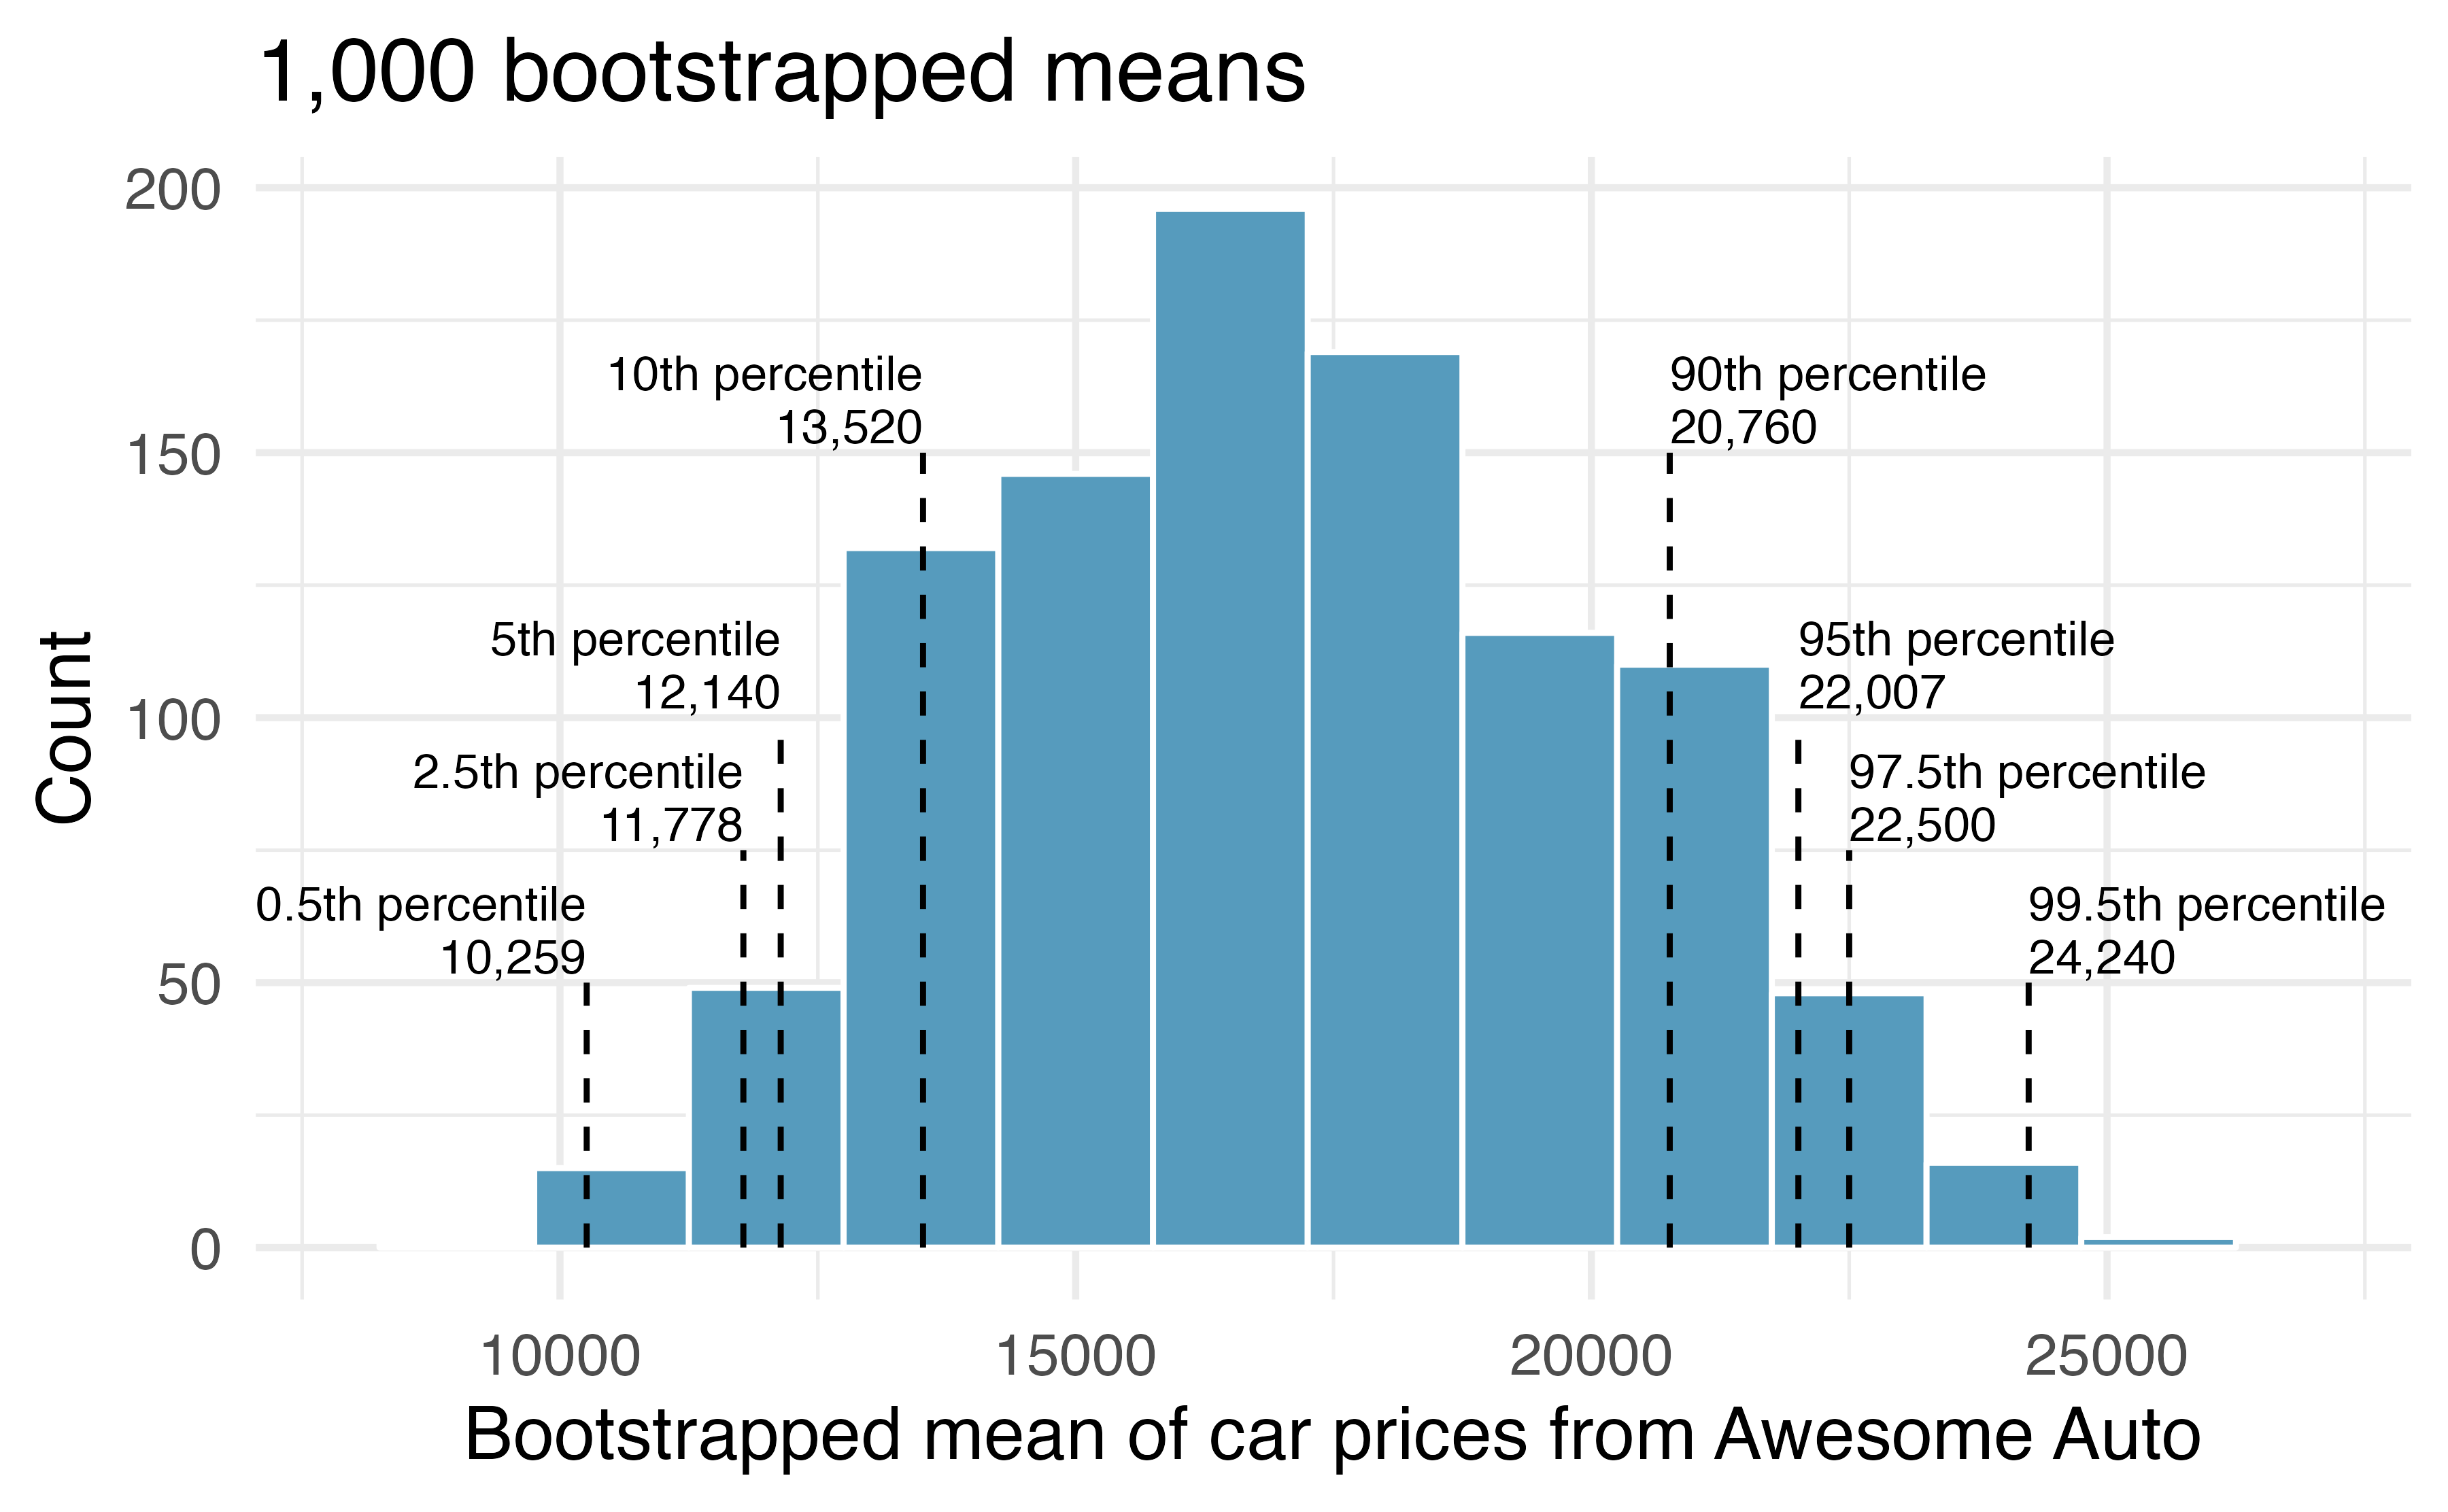 A histogram of the means of 1000 bootstrapped samples from the Awesome Auto data.  The percentiles of the bootstrapped means are given to create 80%, 90%, 95%, or 99% bootstrap confidence intervals for the true mean of the population.